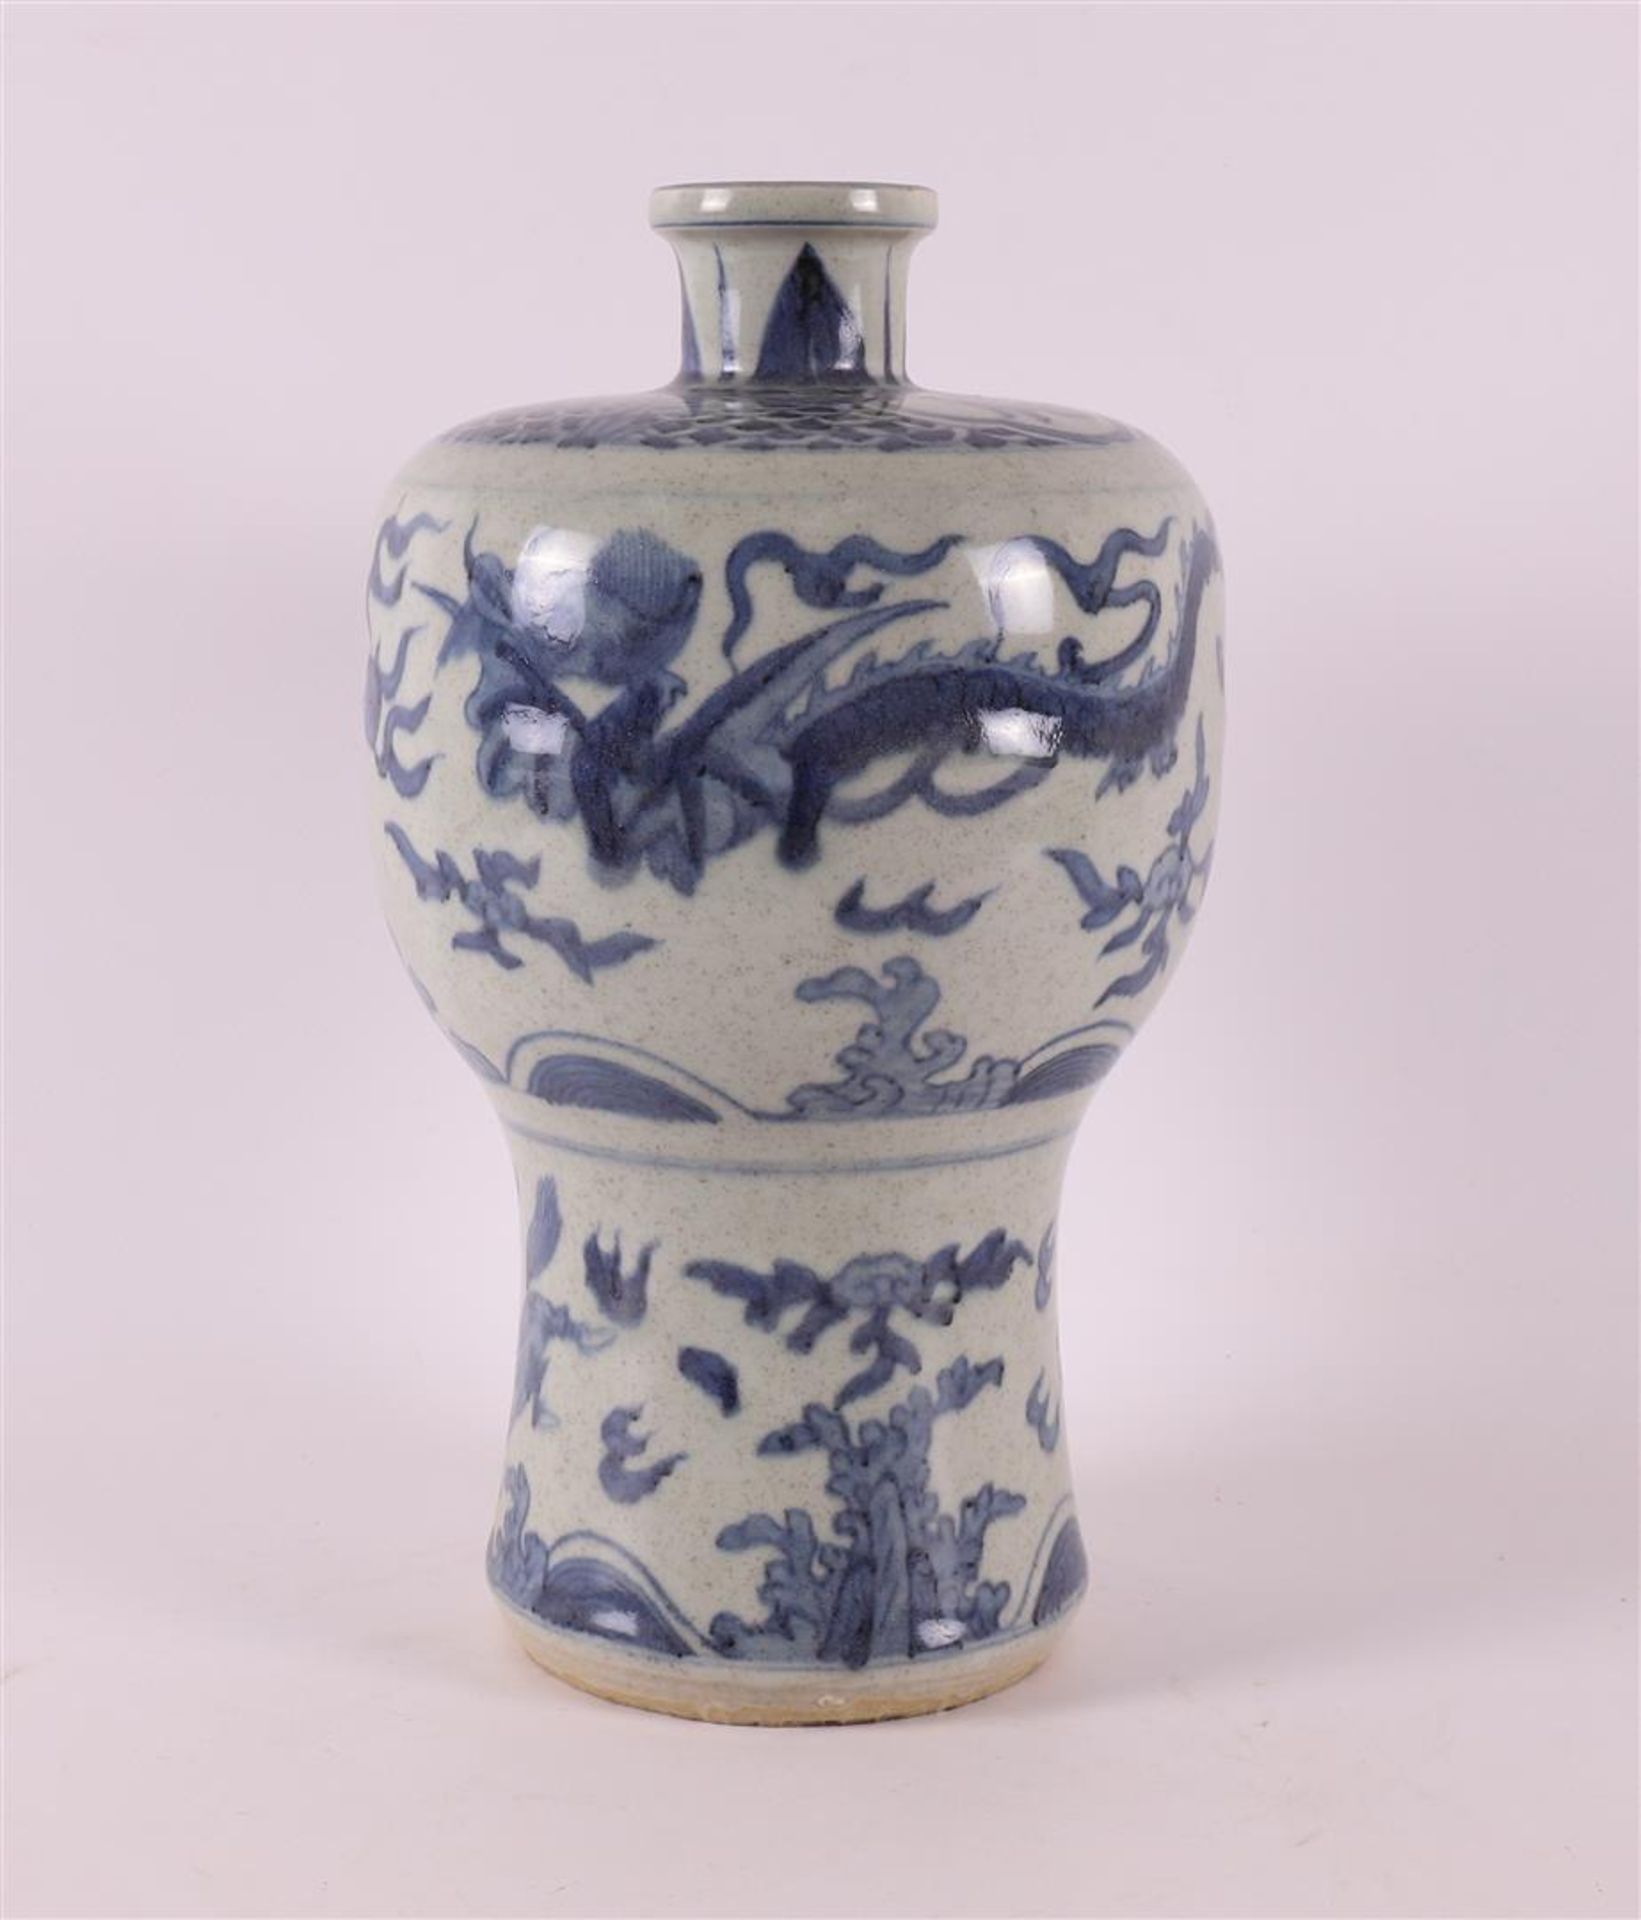 A blue/white porcelain Meiping vase, China, 2nd half 20th century.